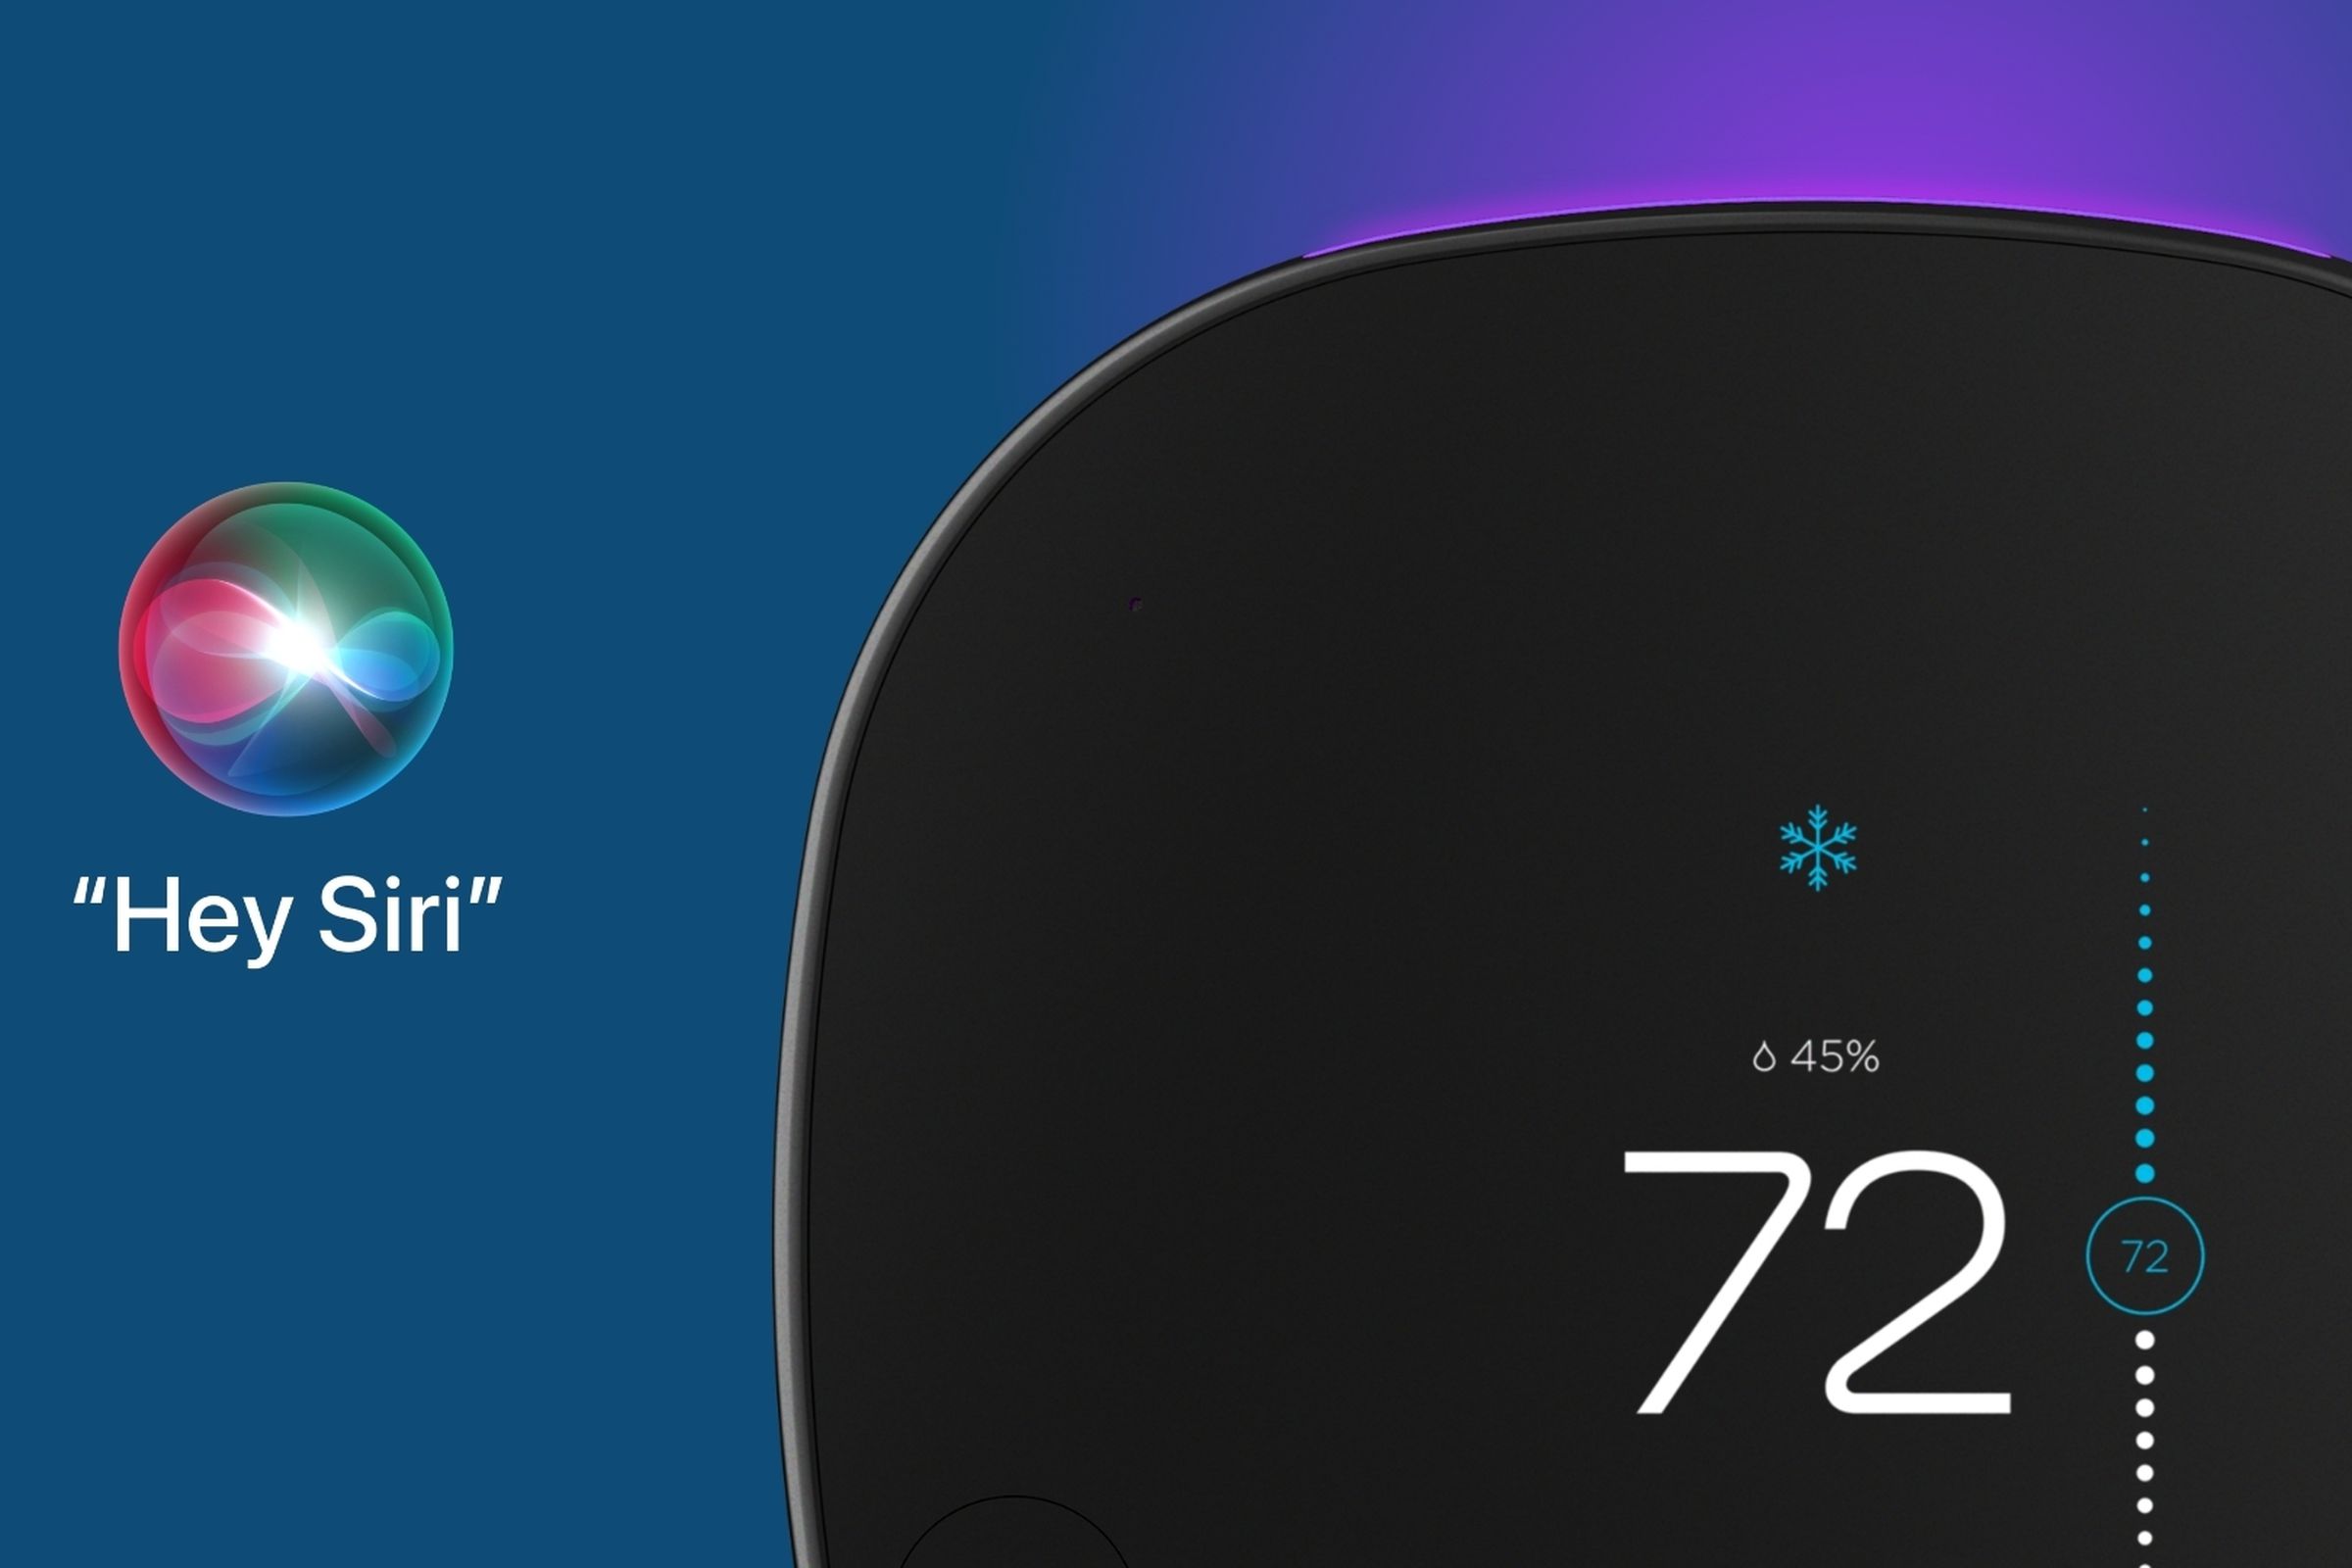 Siri can now be set as the default voice assistant in the Ecobee SmartThermostat.